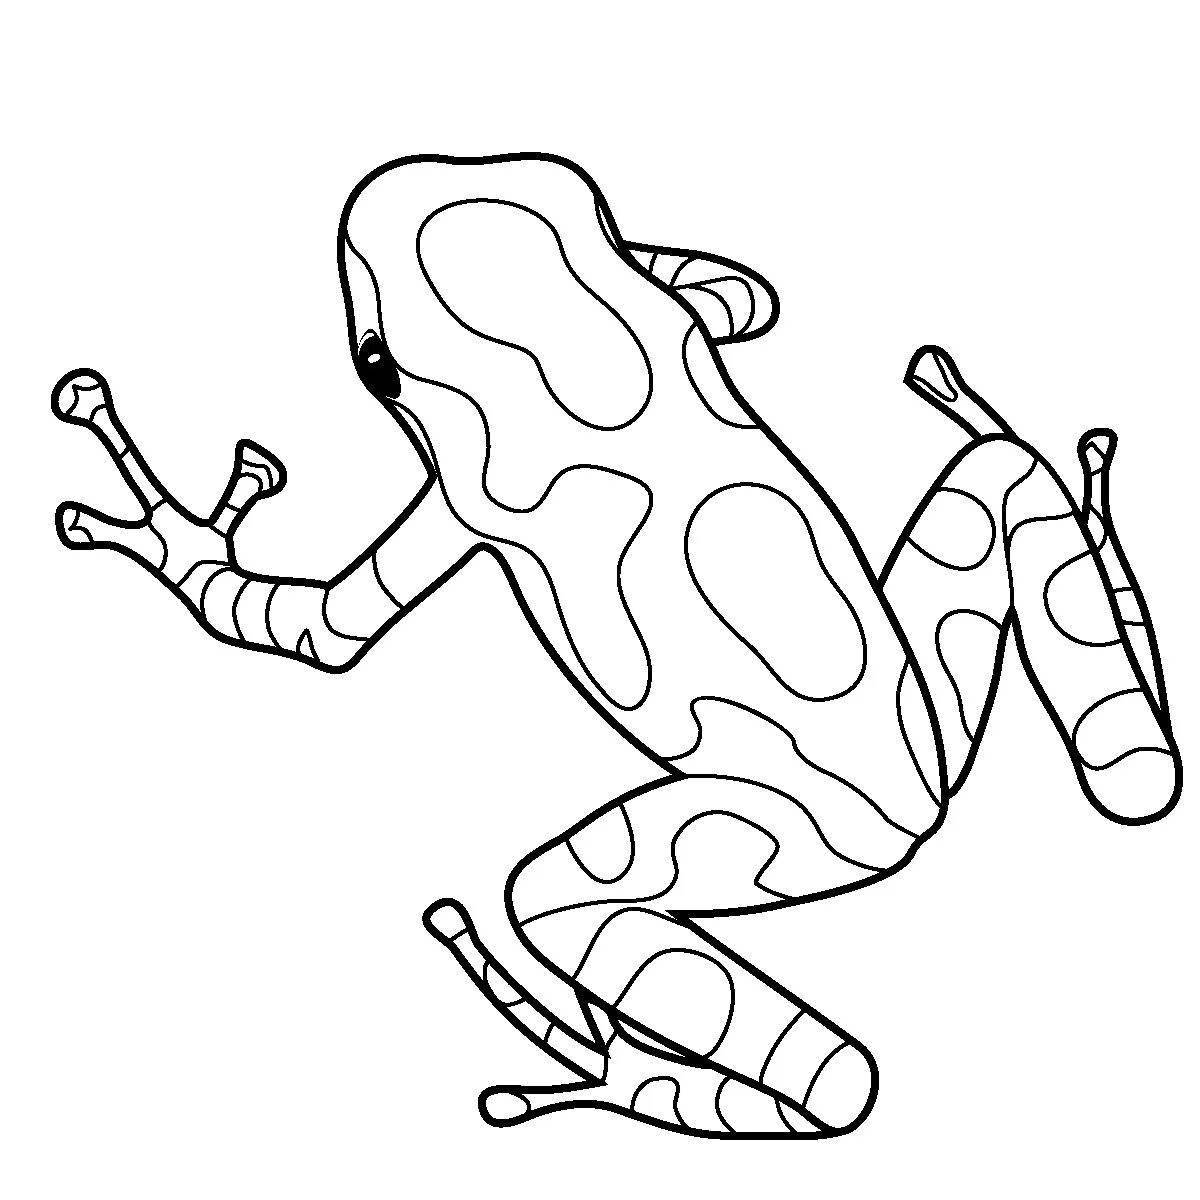 Dart frog coloring page